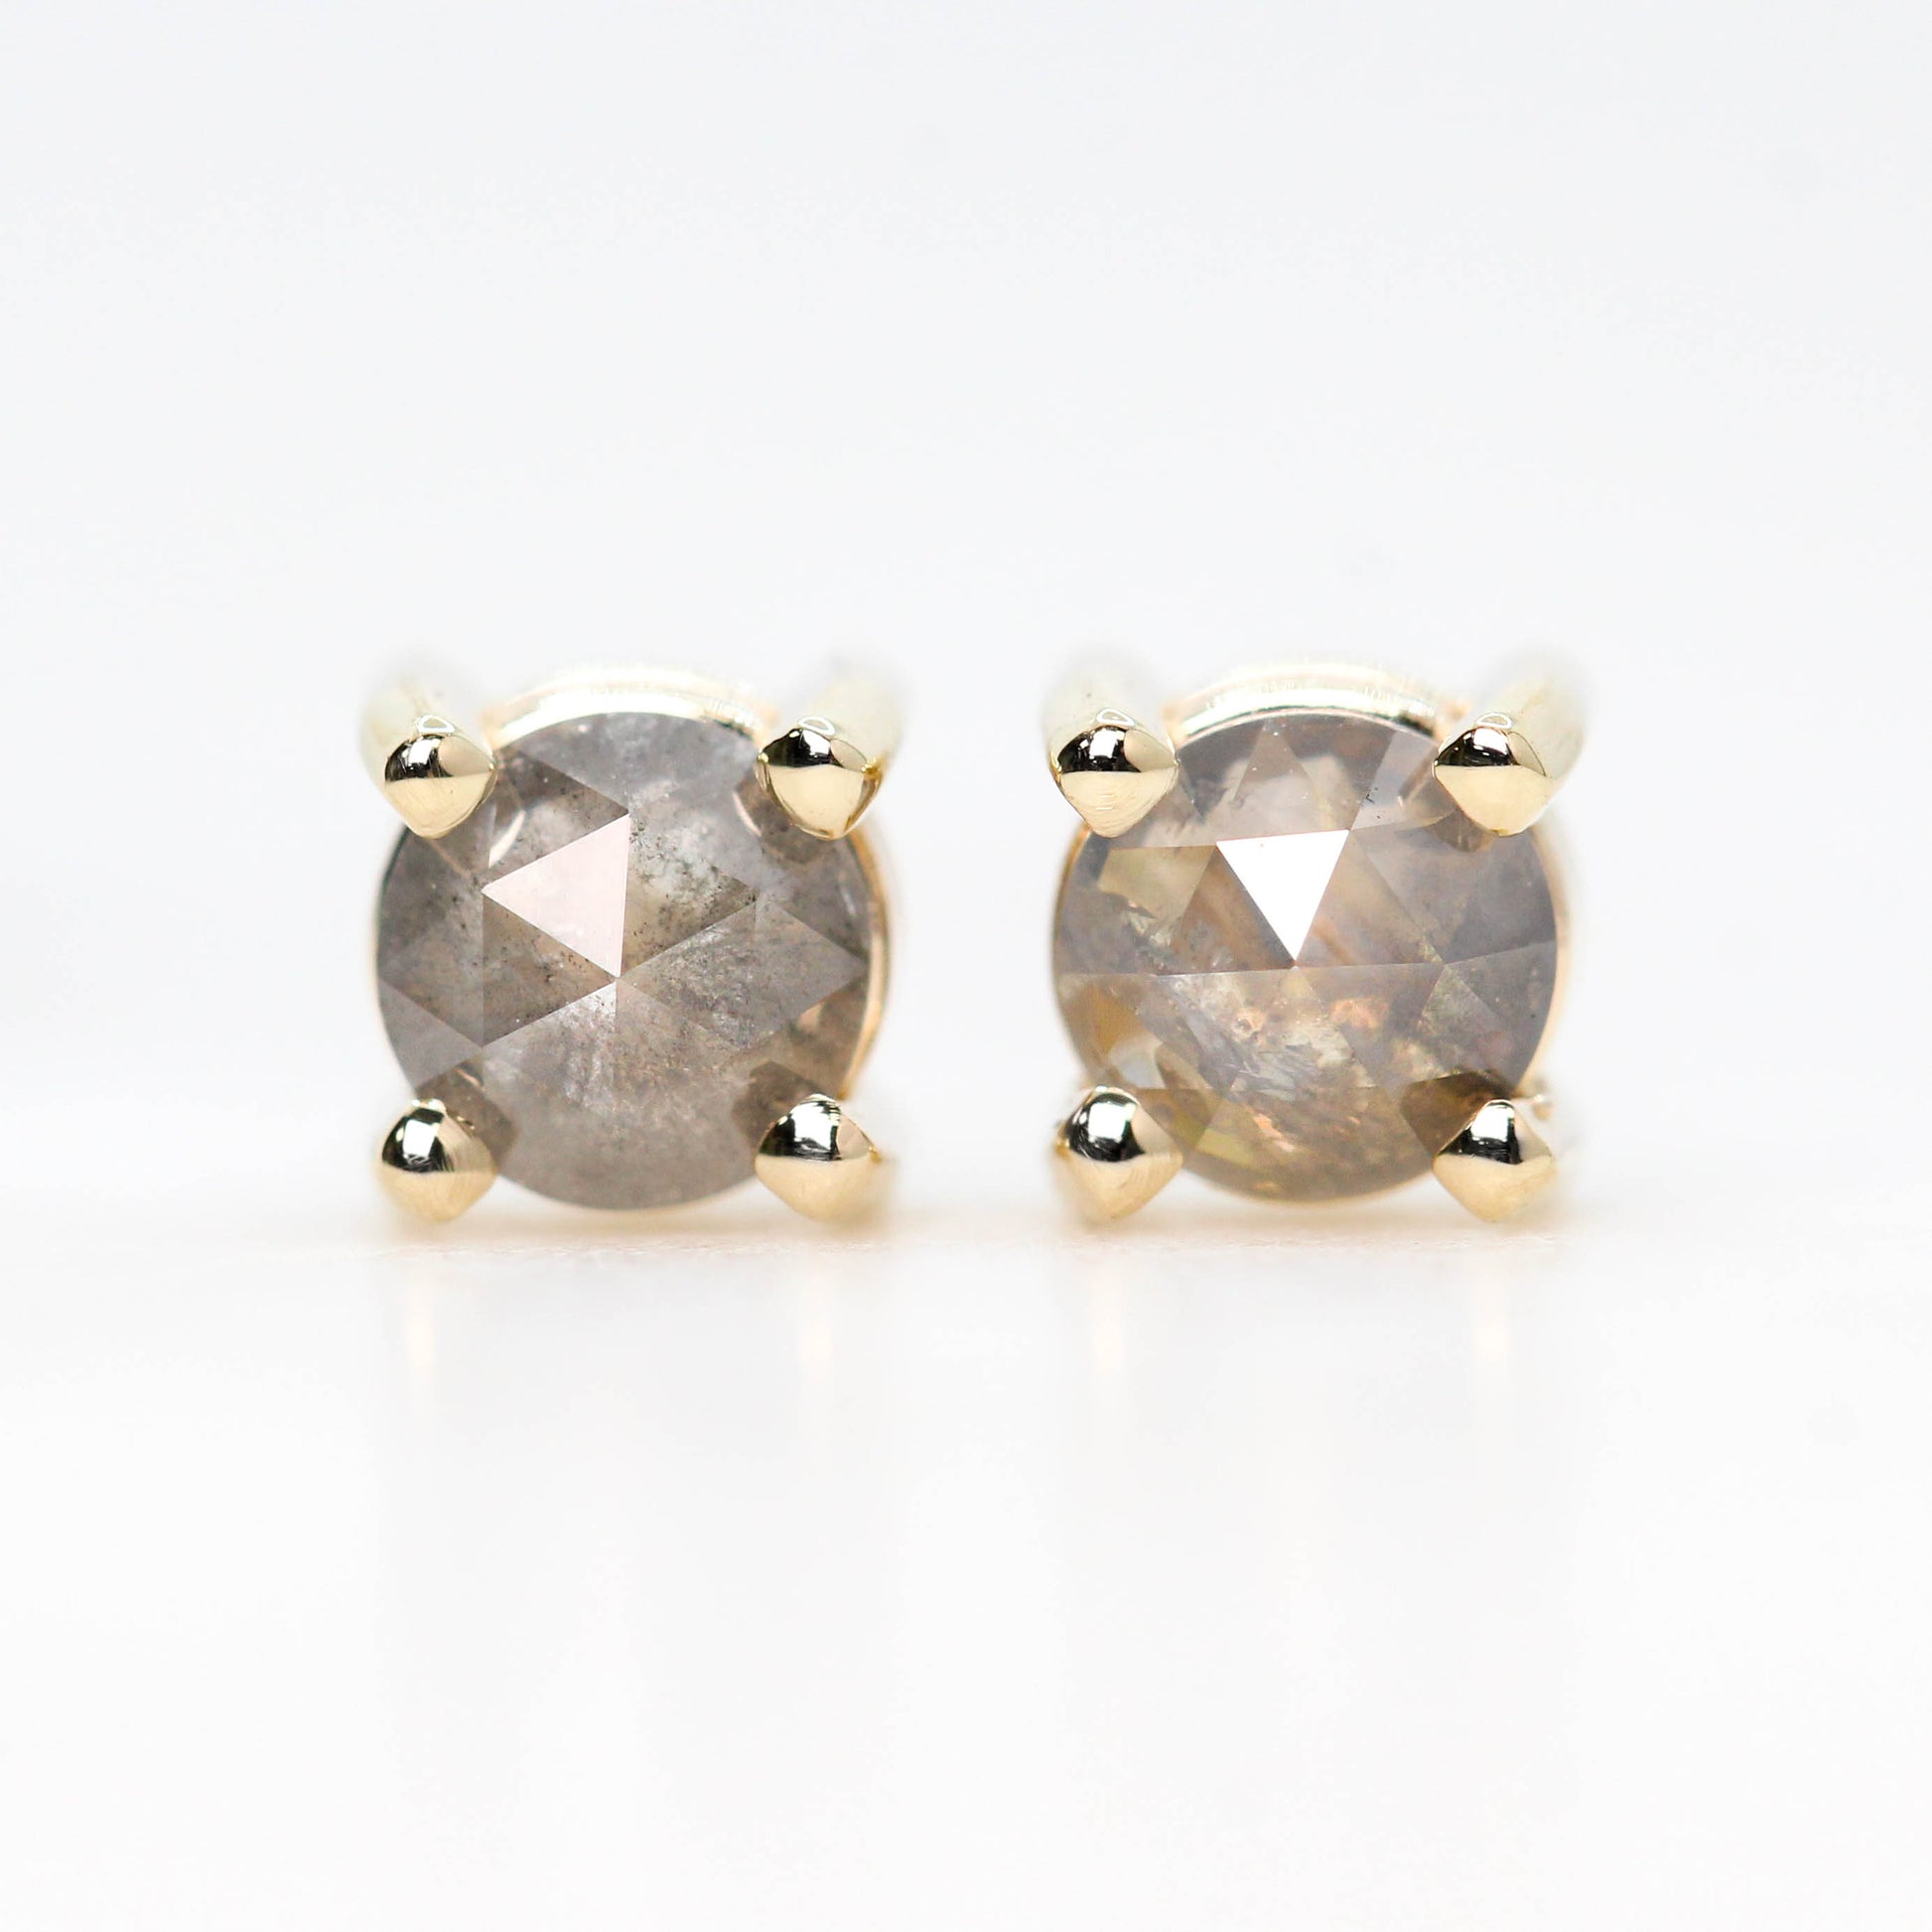 Rose Cut 4.25mm-4.5mm Misty Gray Celestial Diamond Earring Studs in 14k Yellow Gold - Ready to Ship - Midwinter Co. Alternative Bridal Rings and Modern Fine Jewelry